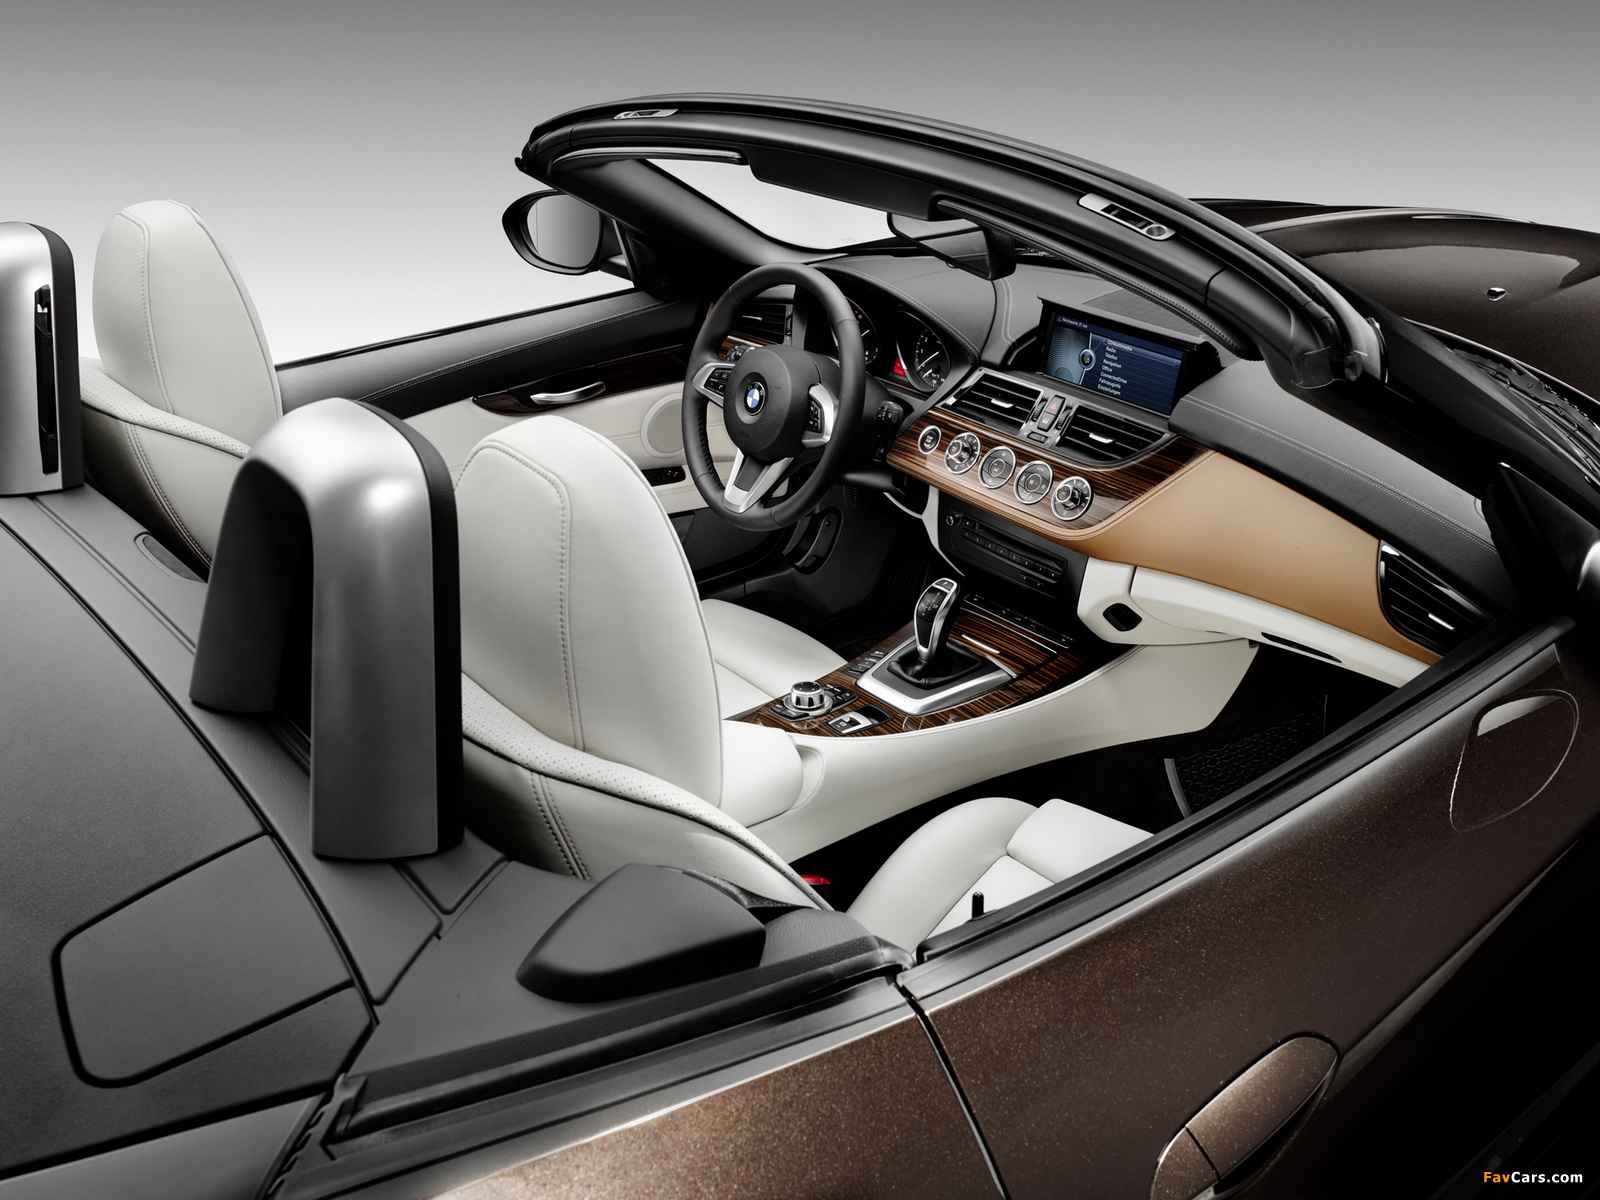 Images of BMW Z4 sDrive35i Roadster Pure Fusion Design (E89) 2013 (1600 x 1200)